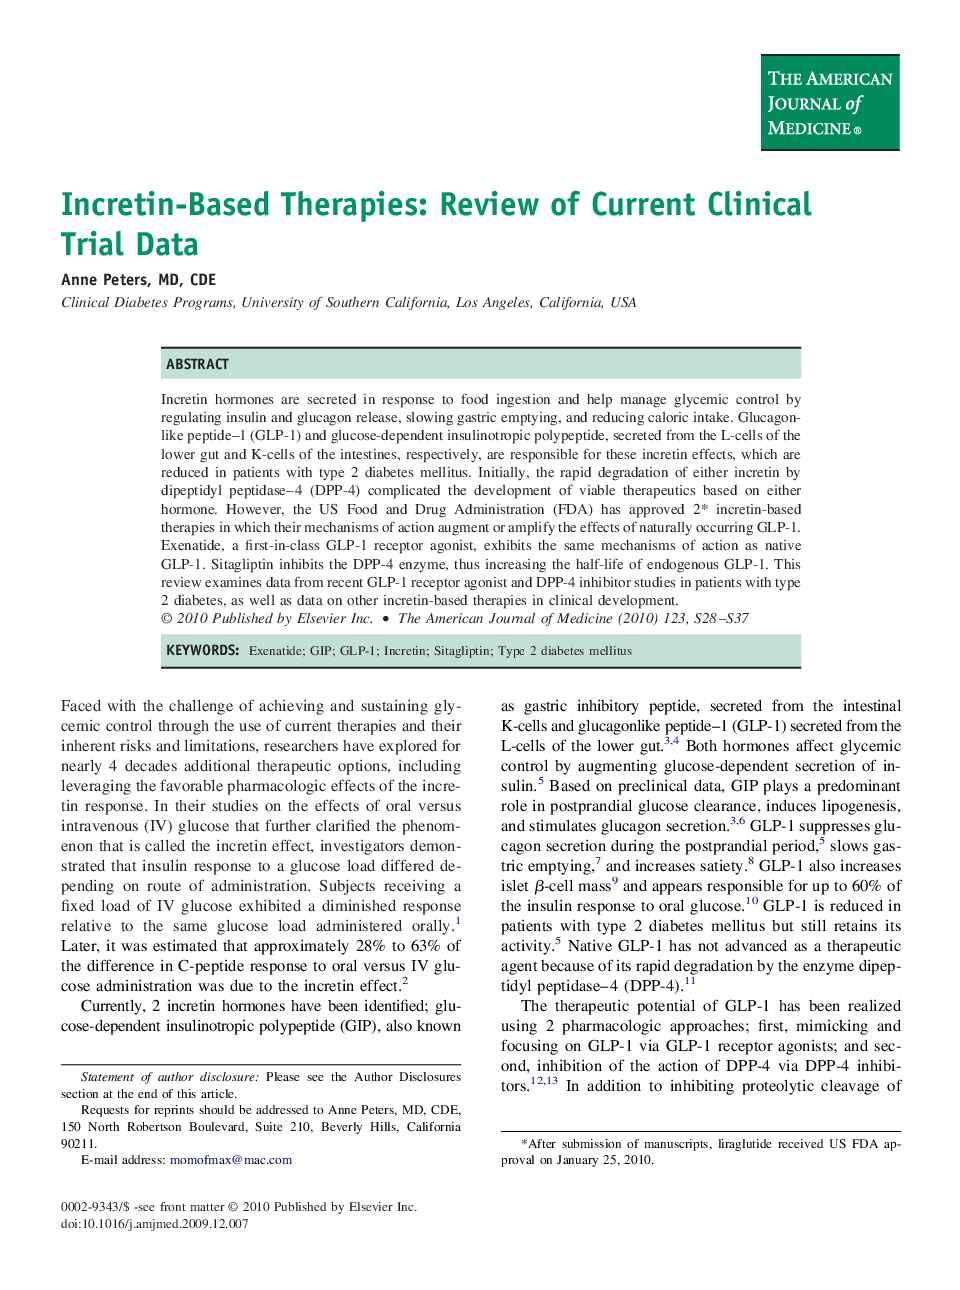 Incretin-Based Therapies: Review of Current Clinical Trial Data 